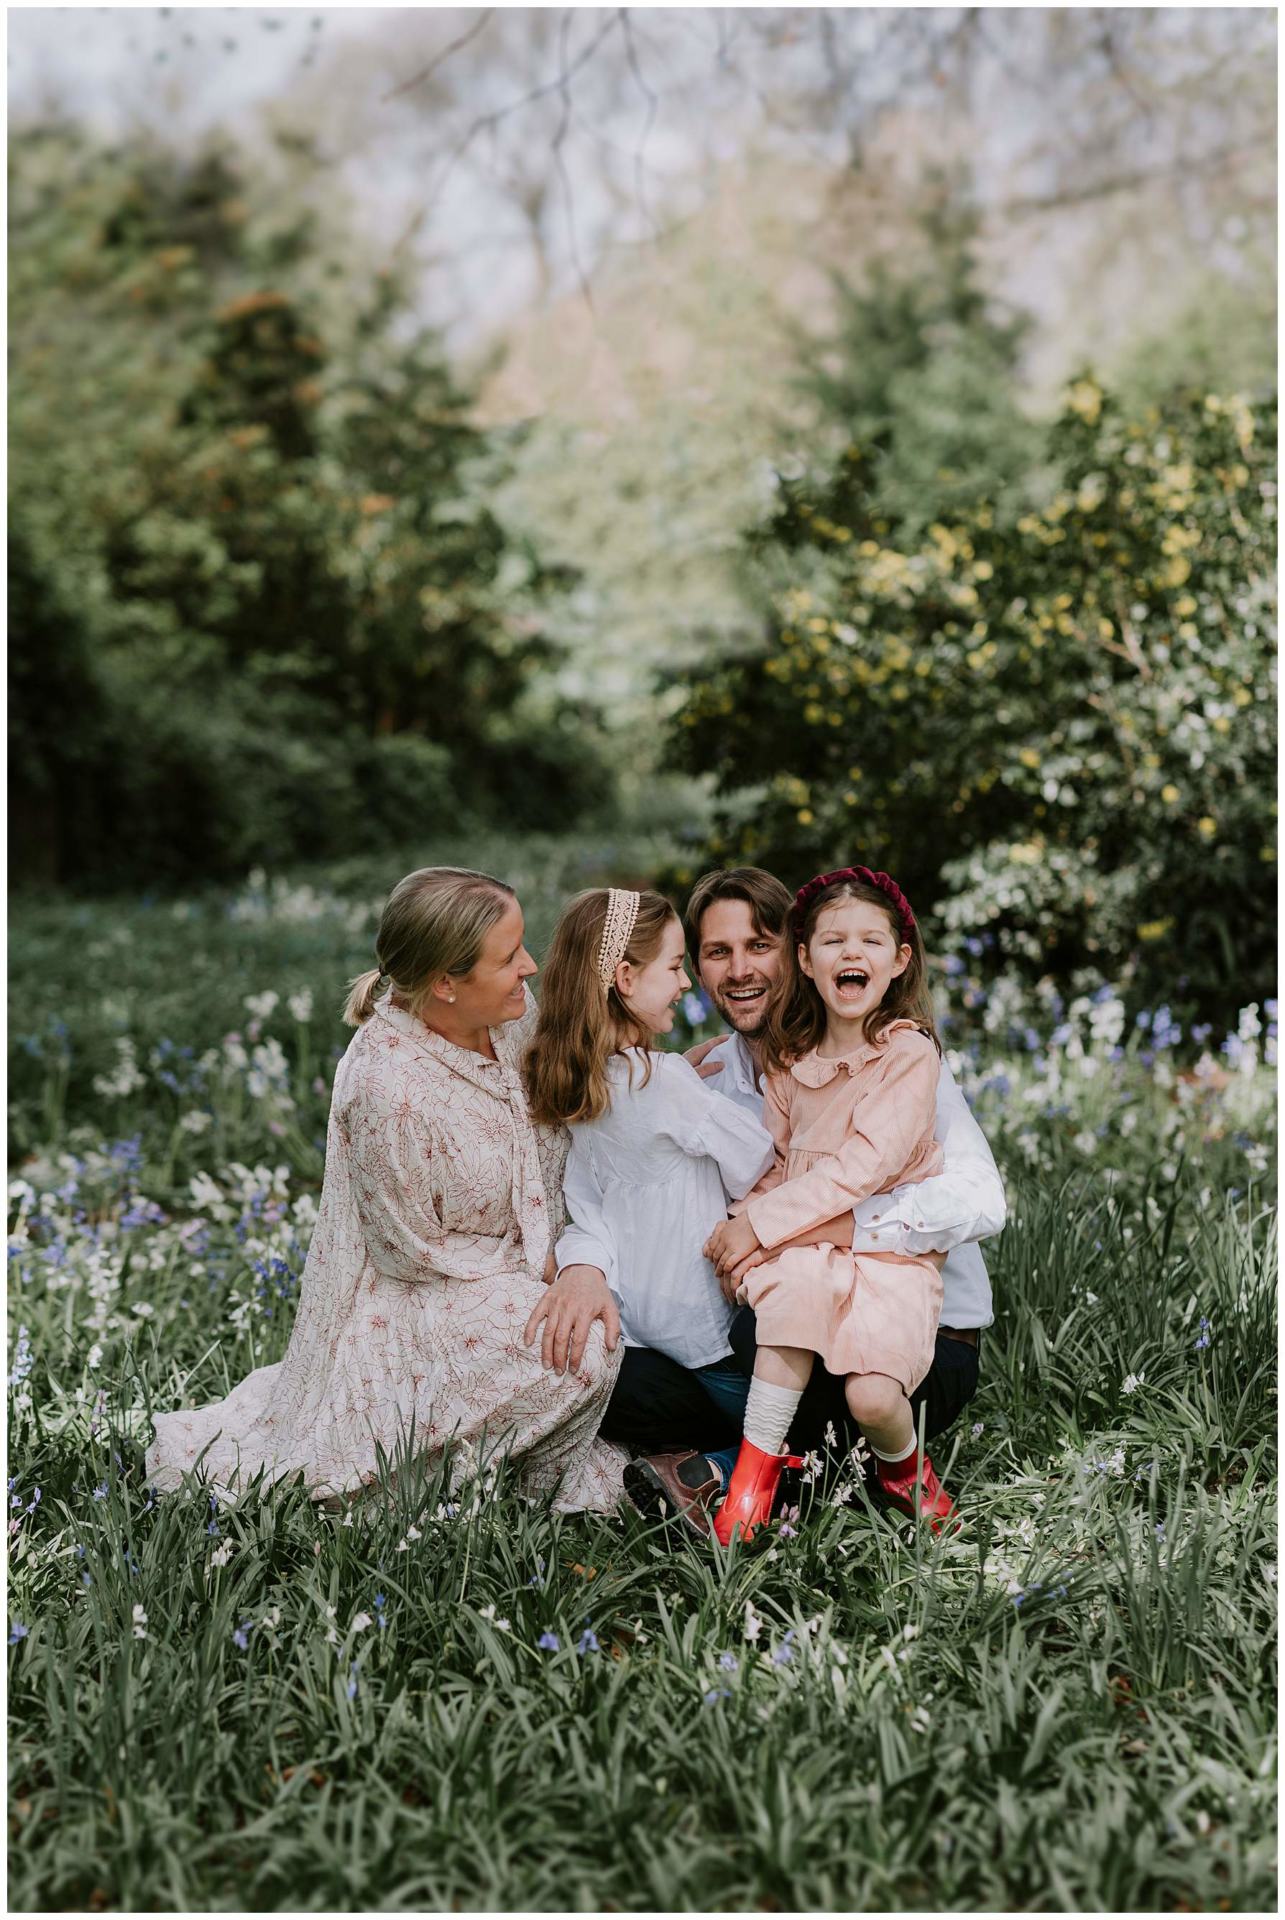 Charlotte Kiri Photography - Family Photography of a couple sitting in a field of flowers with their two young girls as they laugh together in Wanaka, New Zealand.